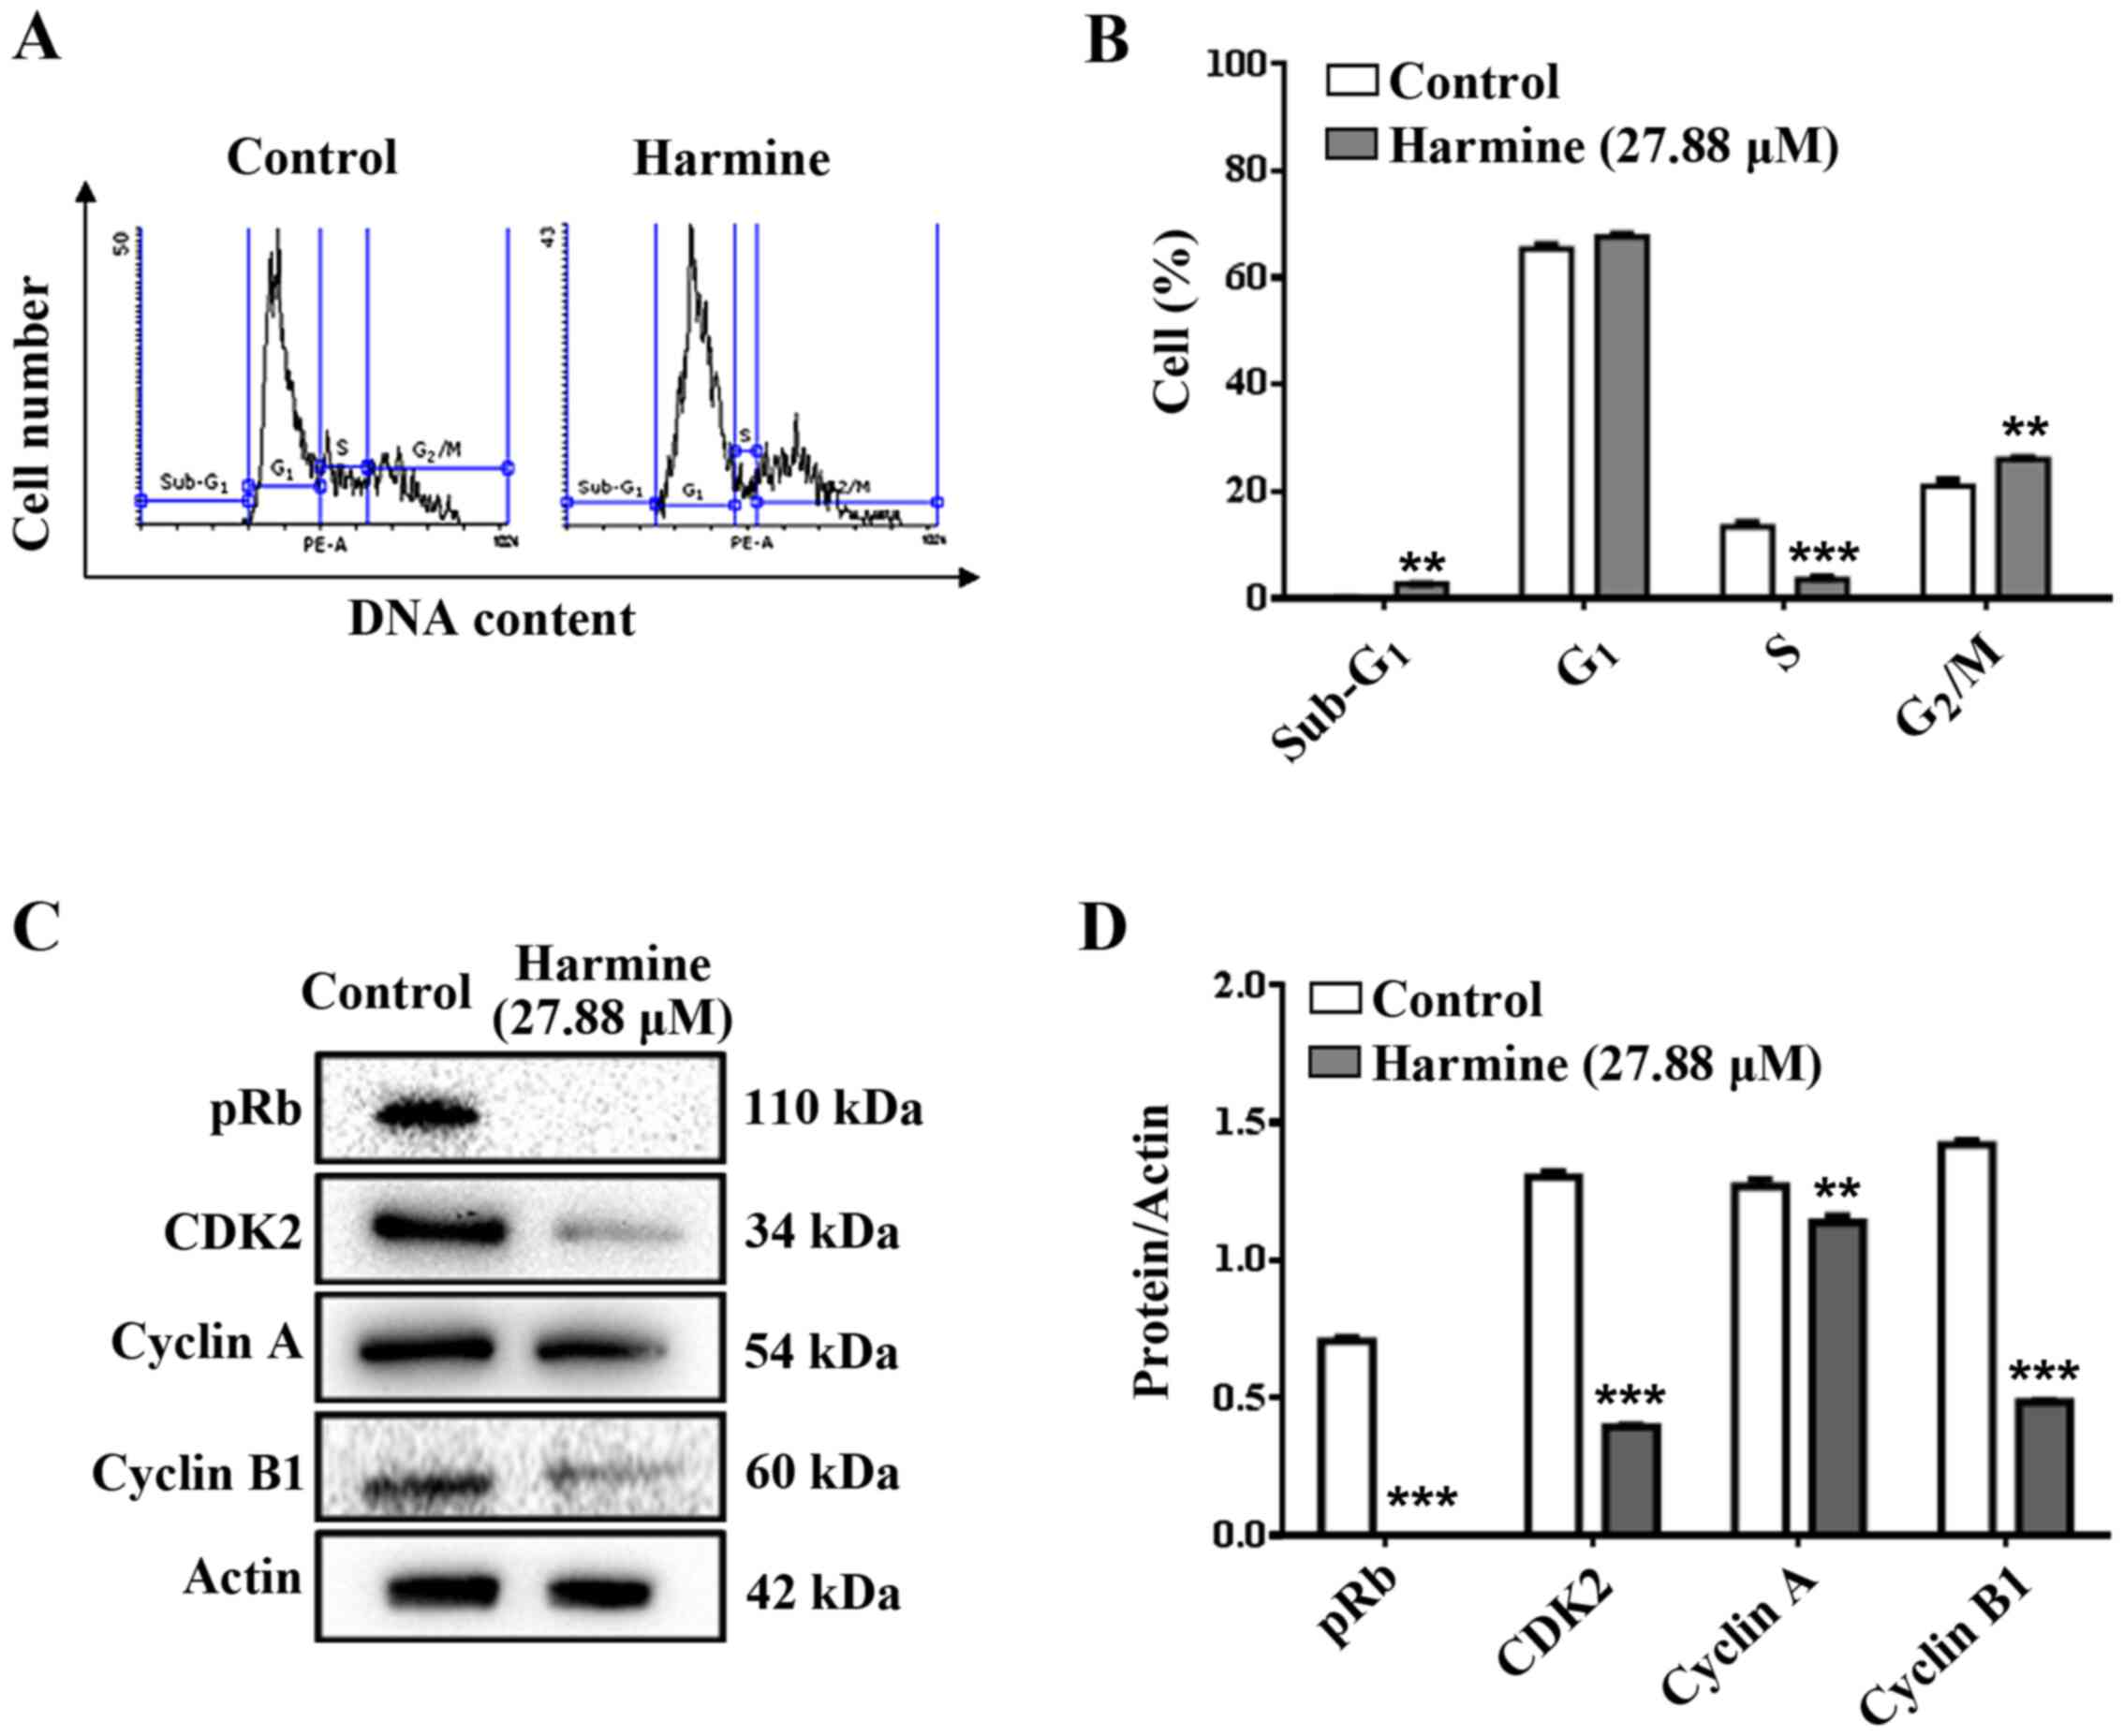 B Carboline Alkaloid Harmine Induces Dna Damage And Triggers Apoptosis By A Mitochondrial Pathway Study In Silico In Vitro And In Vivo